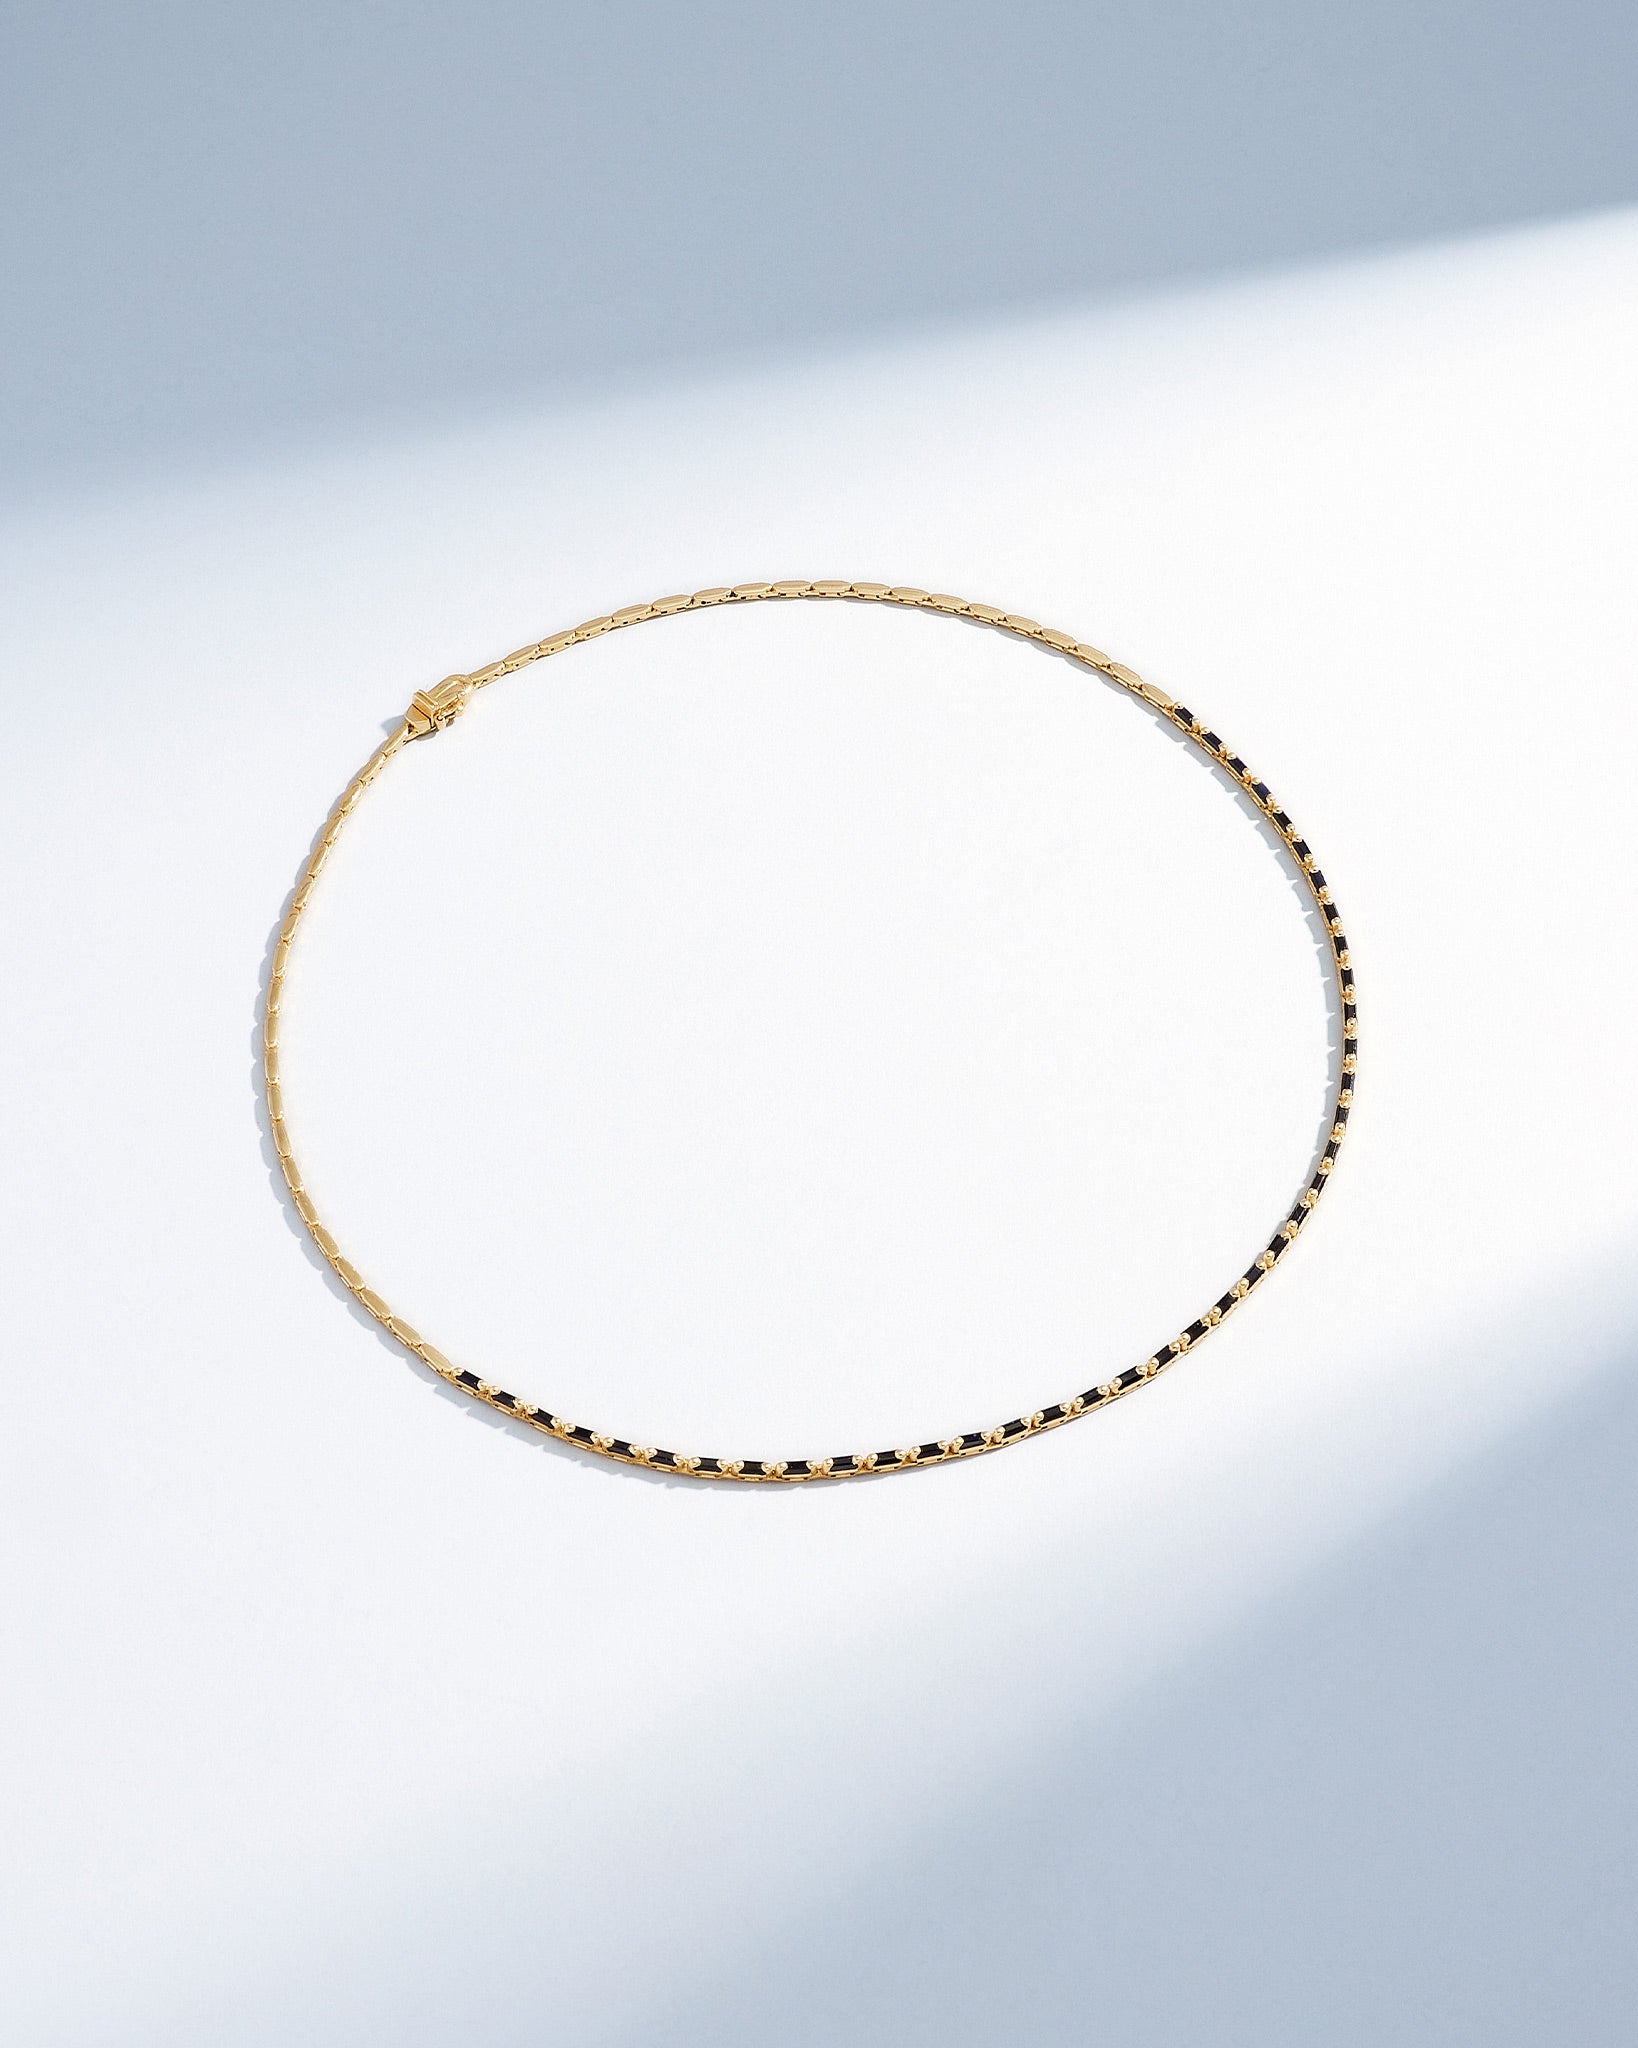 Suzanne Kalan Linear Half Black Sapphire Tennis Necklace in 18k yellow gold